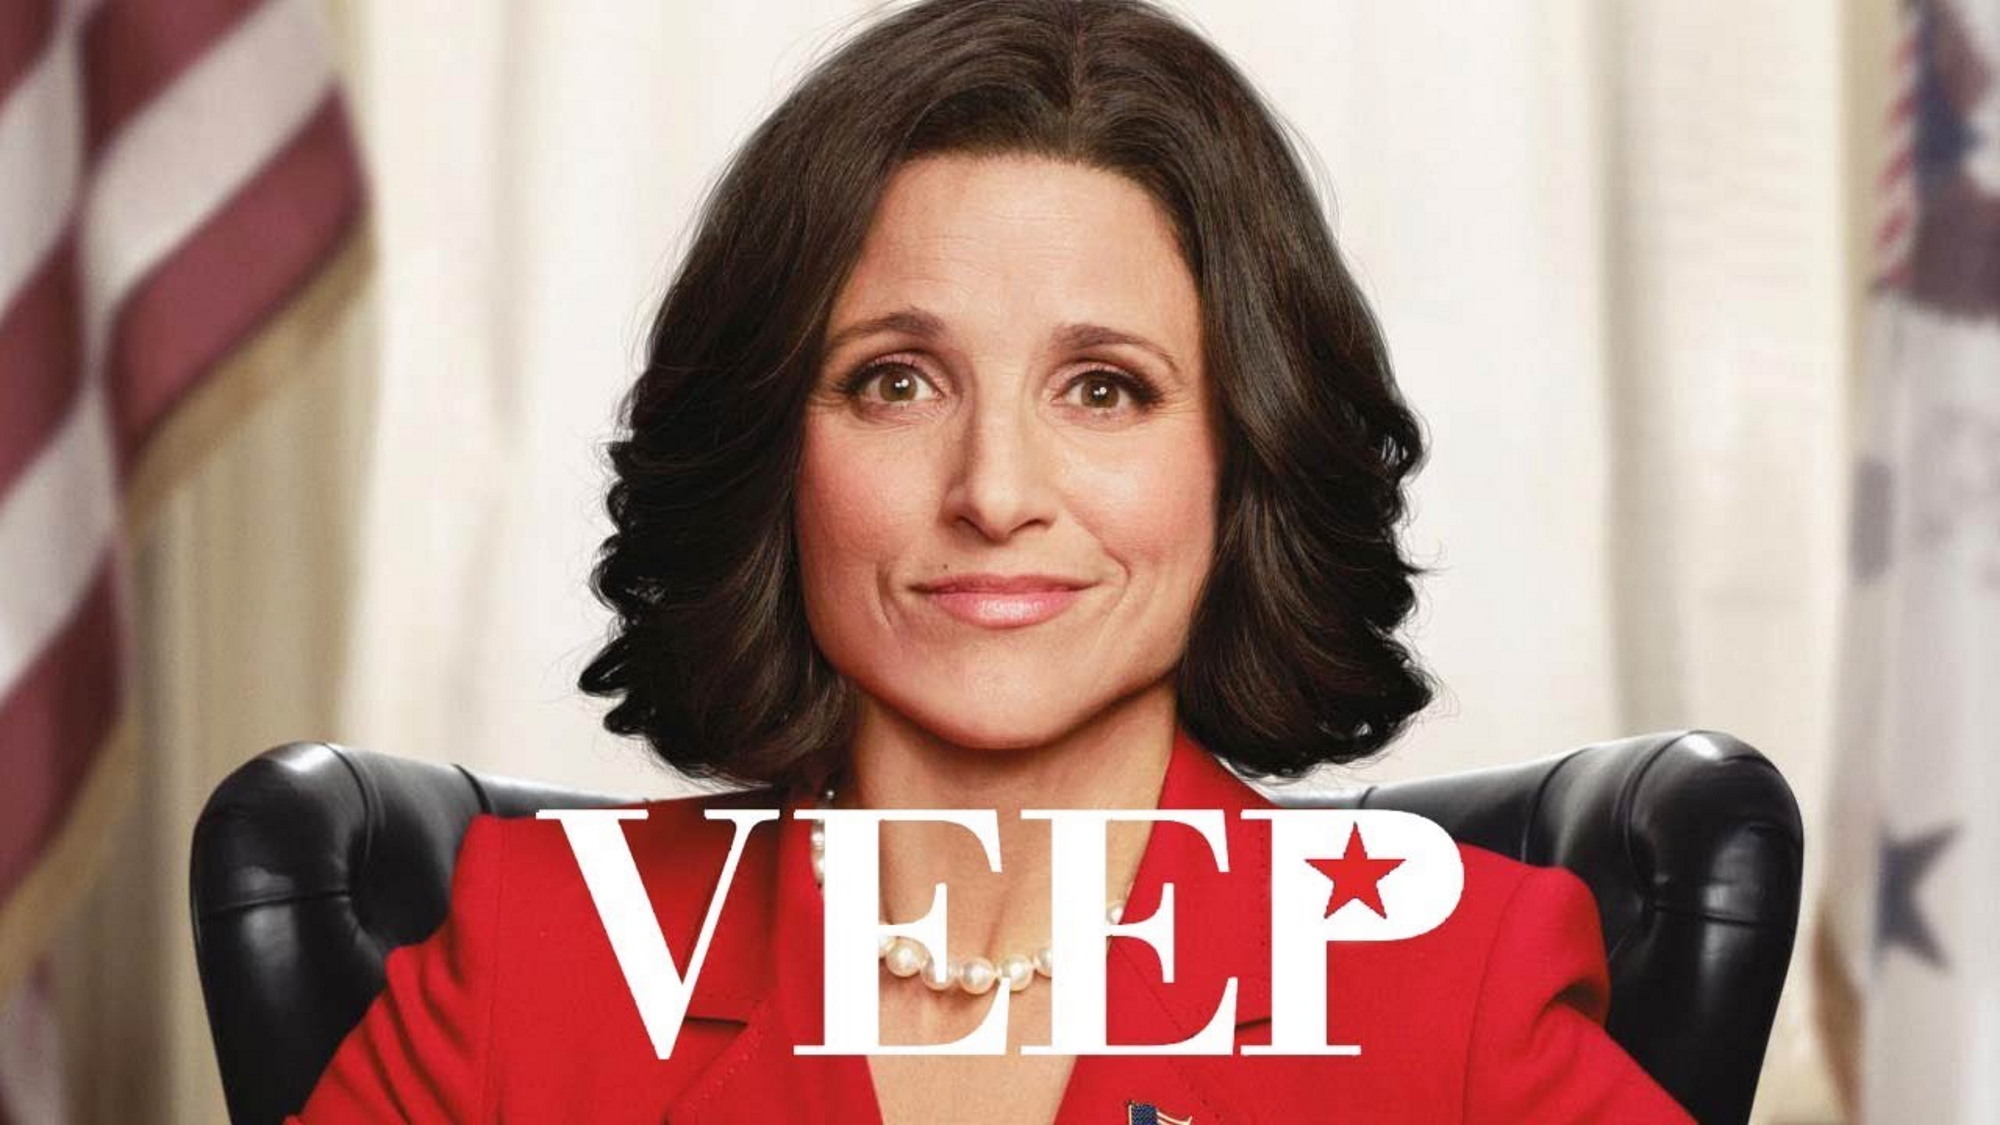 Veep's Selina Meyer has turned her presidency into a slow-motion train  wreck — and it's thrilling - Vox